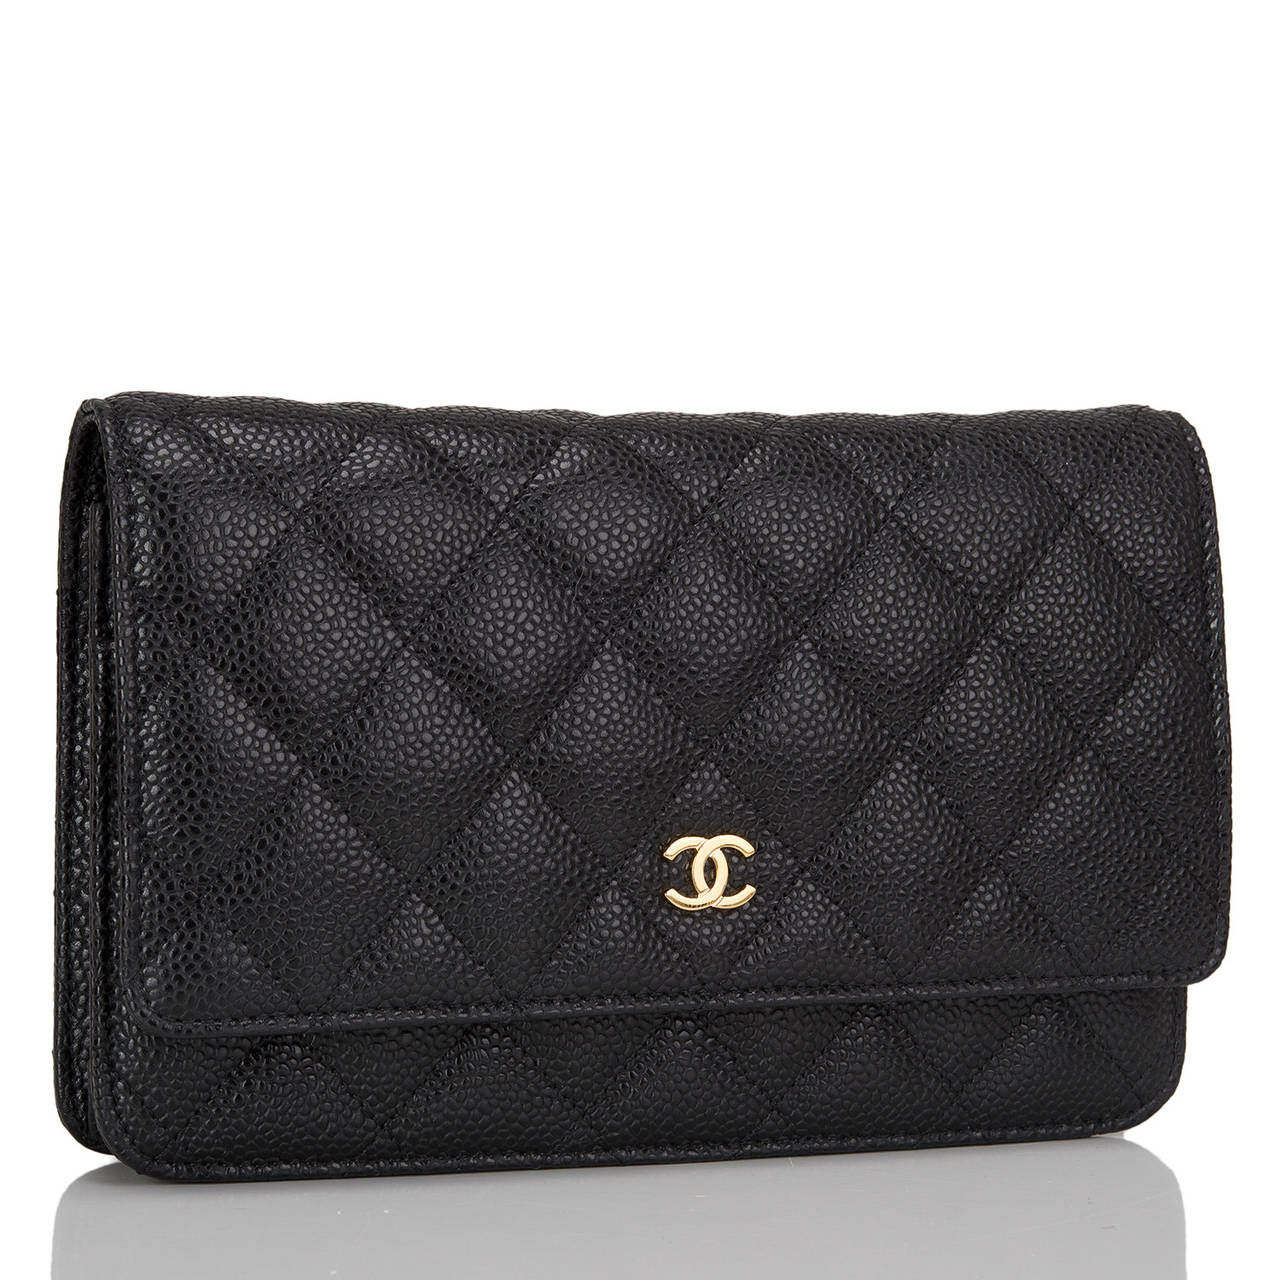 This timeless WOC style is exceptional in that it features gold tone hardware. The bag is made of black caviar leather and has the signature Chanel quilting, front flap with CC charm and hidden snap closure, expandable sides and bottom, half moon